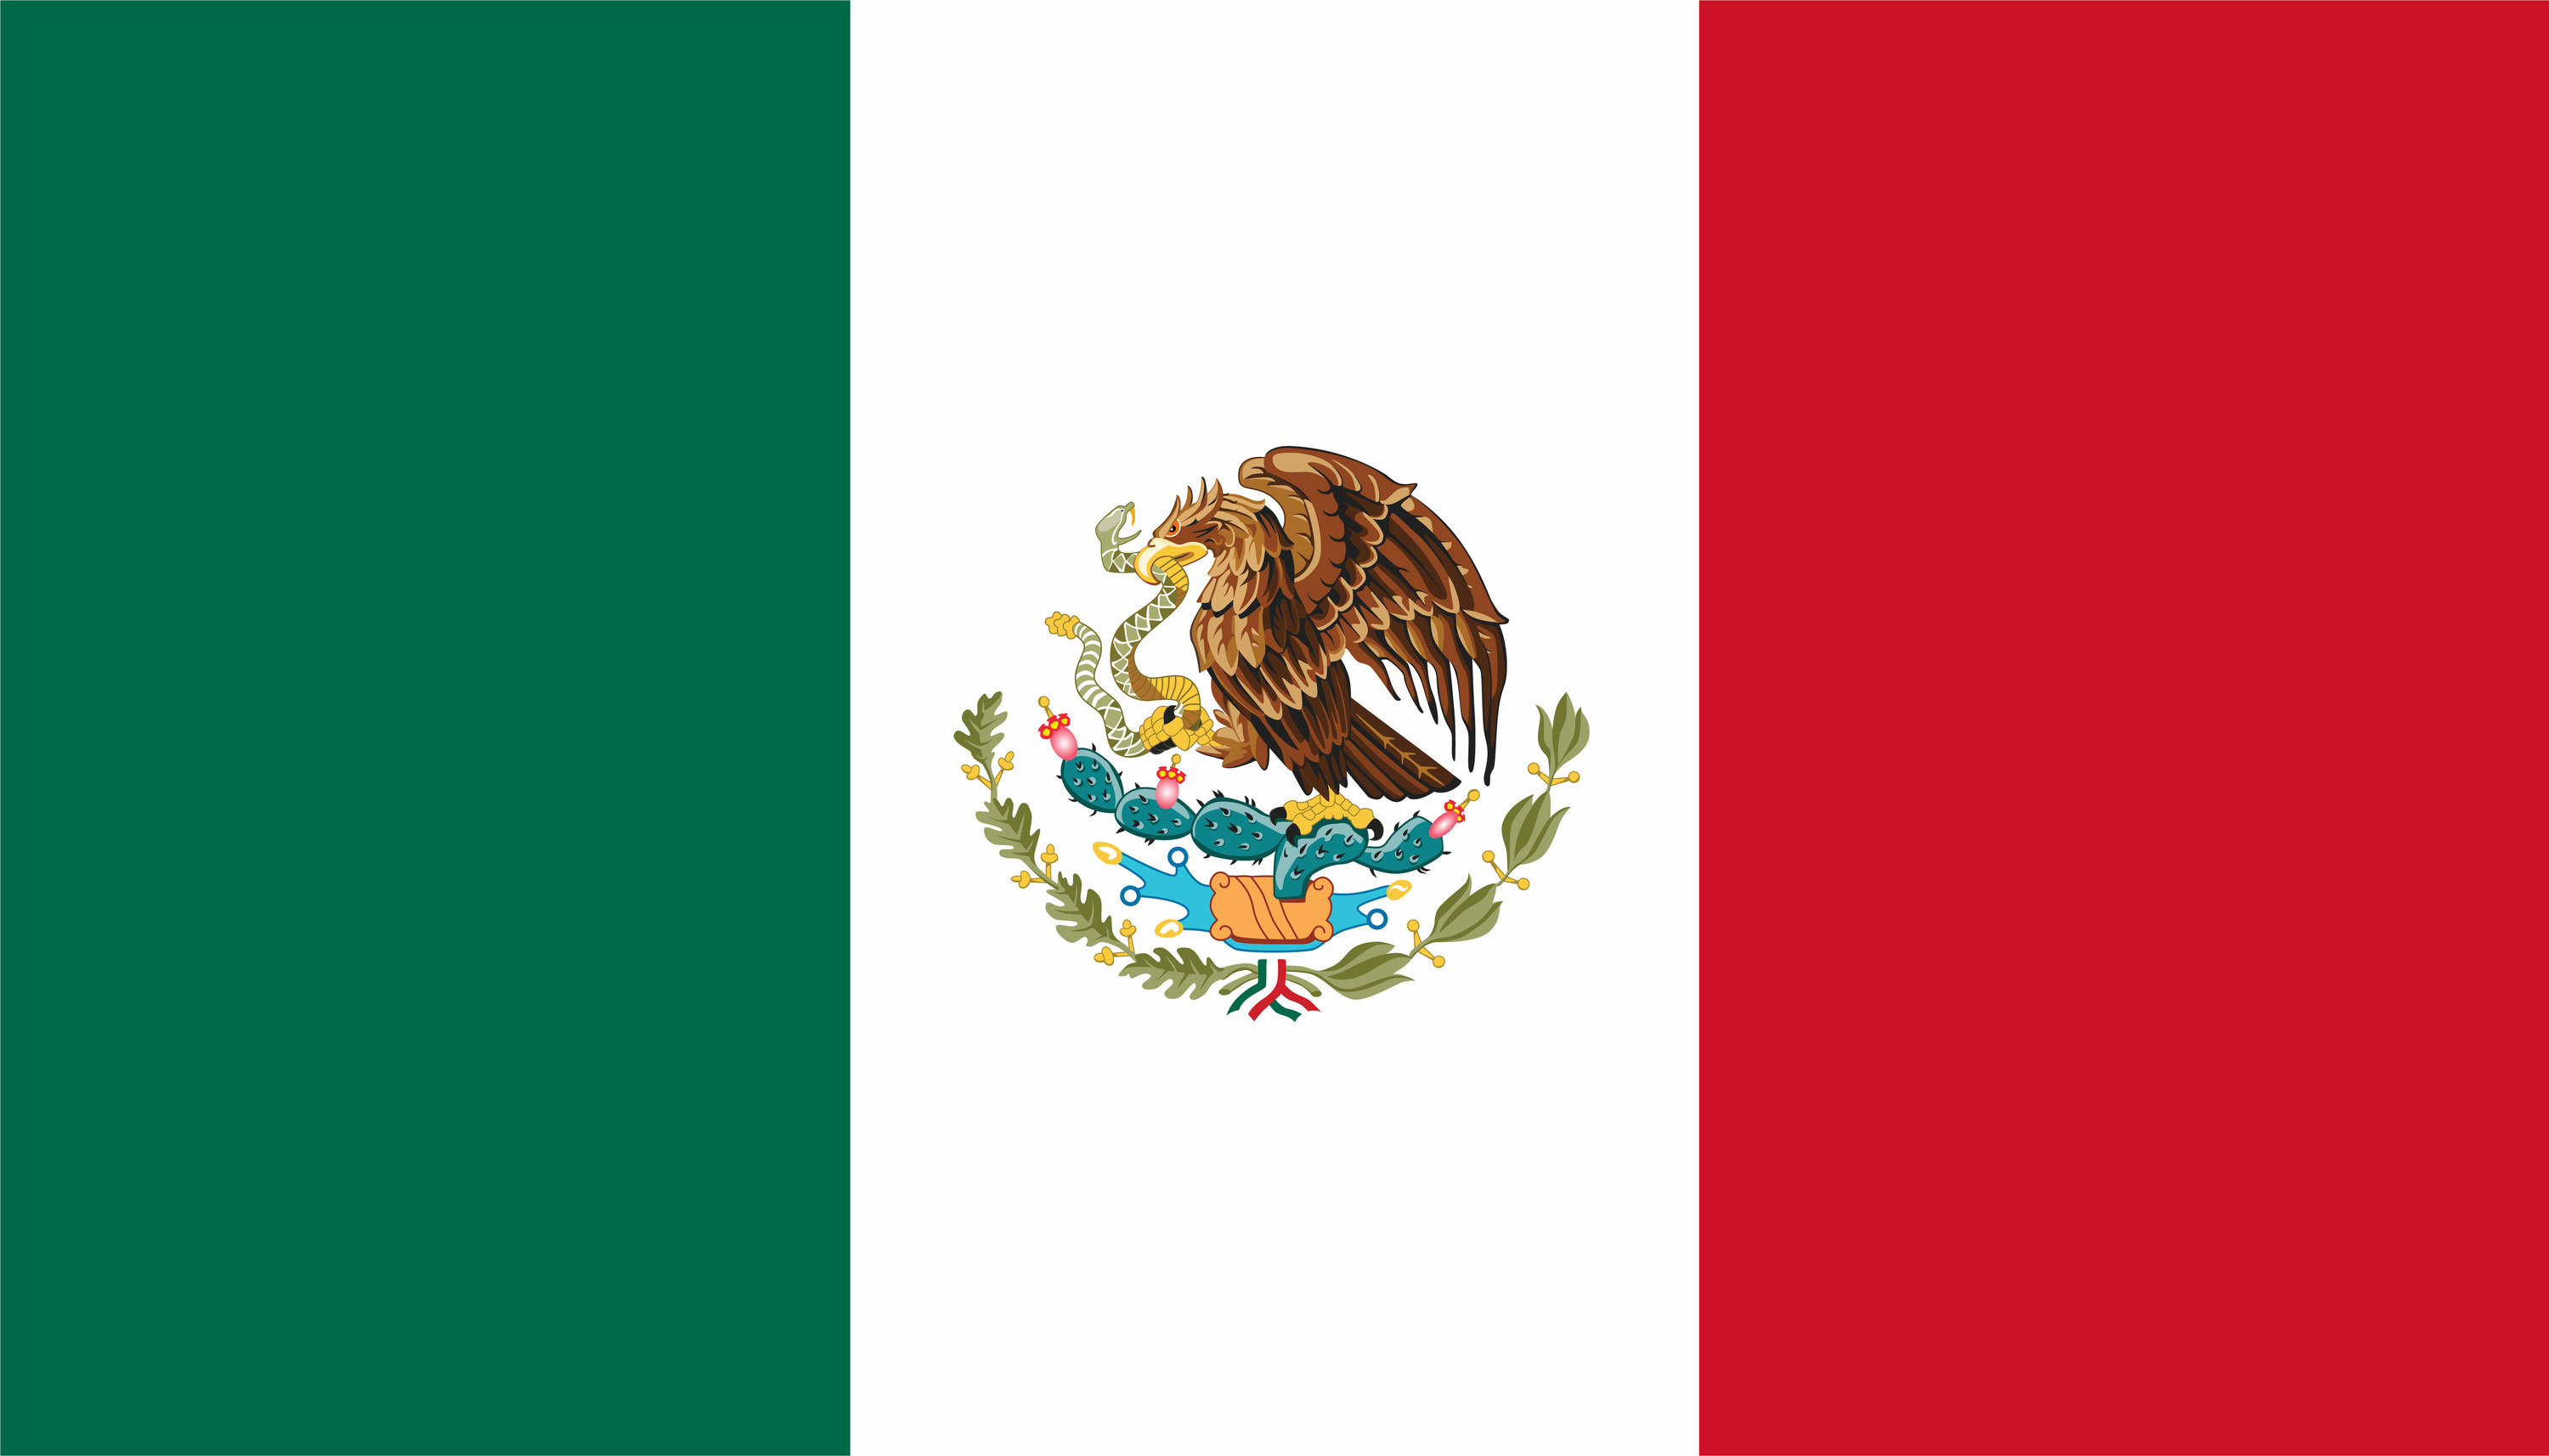 Flag of Mexico, a vertical tricolor of green, white, and red, with the national coat of arms featuring an eagle, a cactus, and a serpent in the center of the white stripe